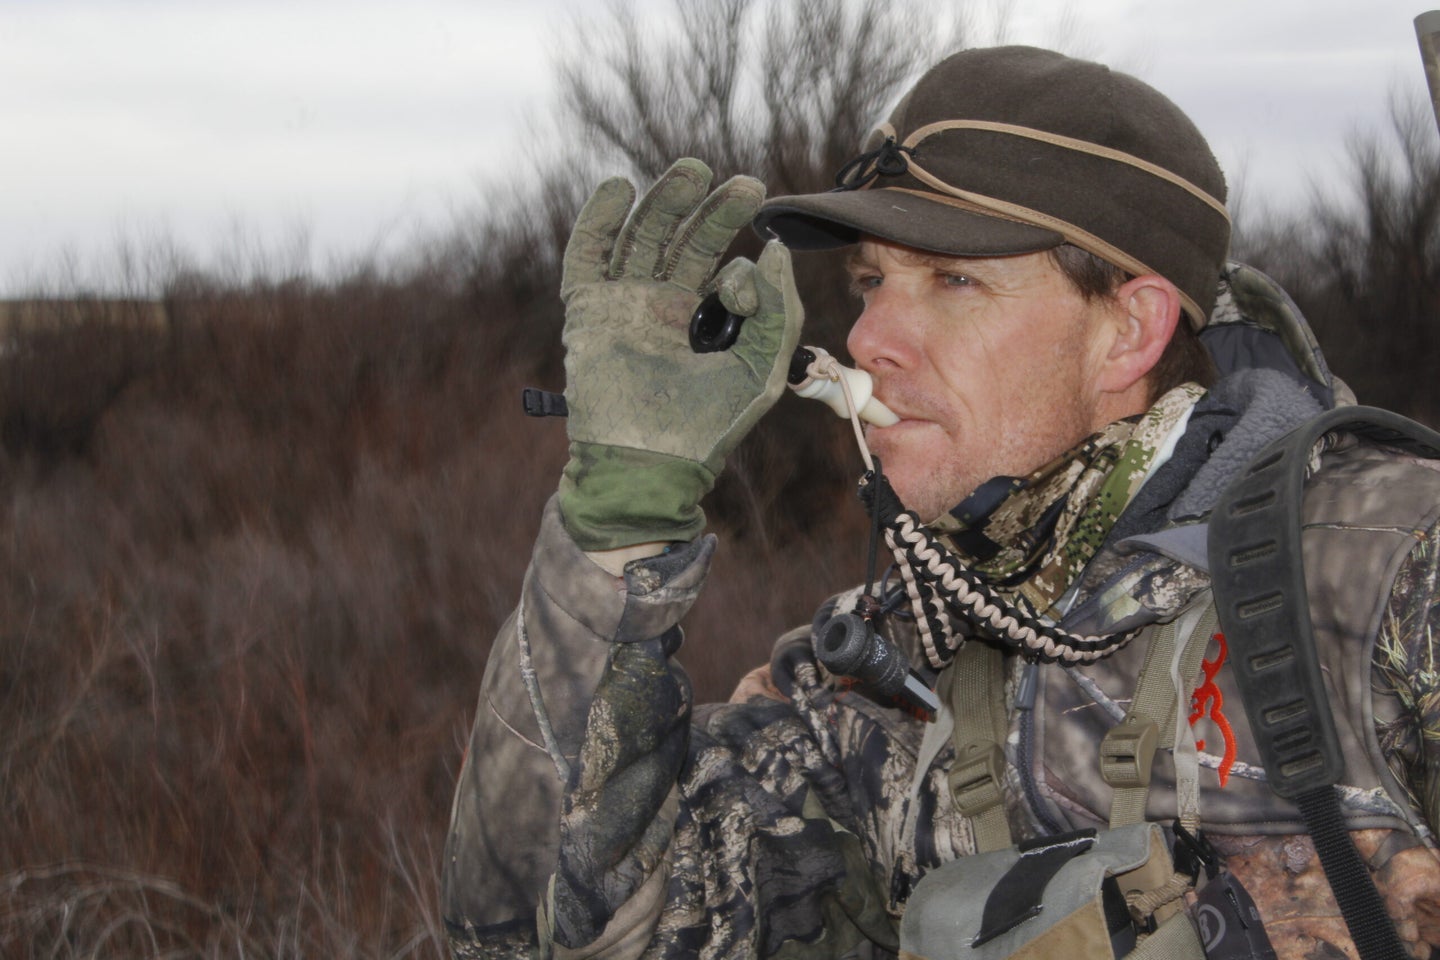 Hunter wearing camouflage blowing on a coyote call.